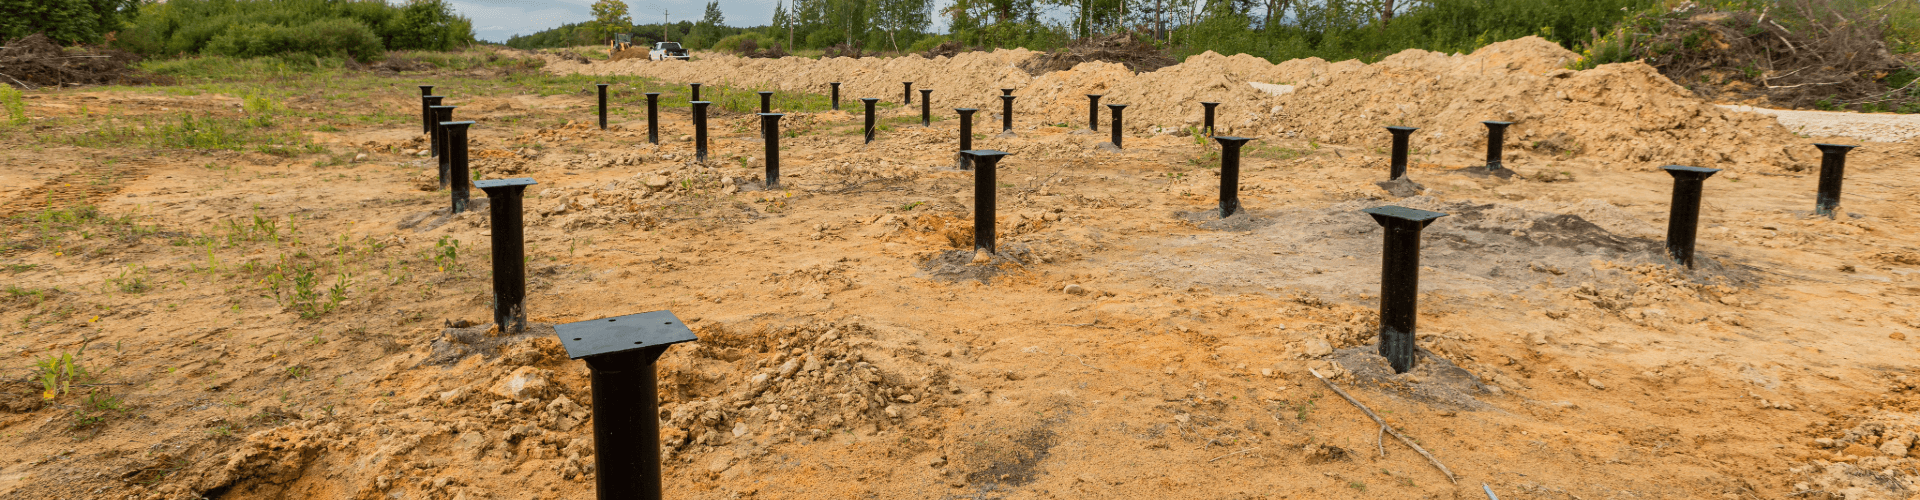 Screw Pile Foundation for a manufactured home